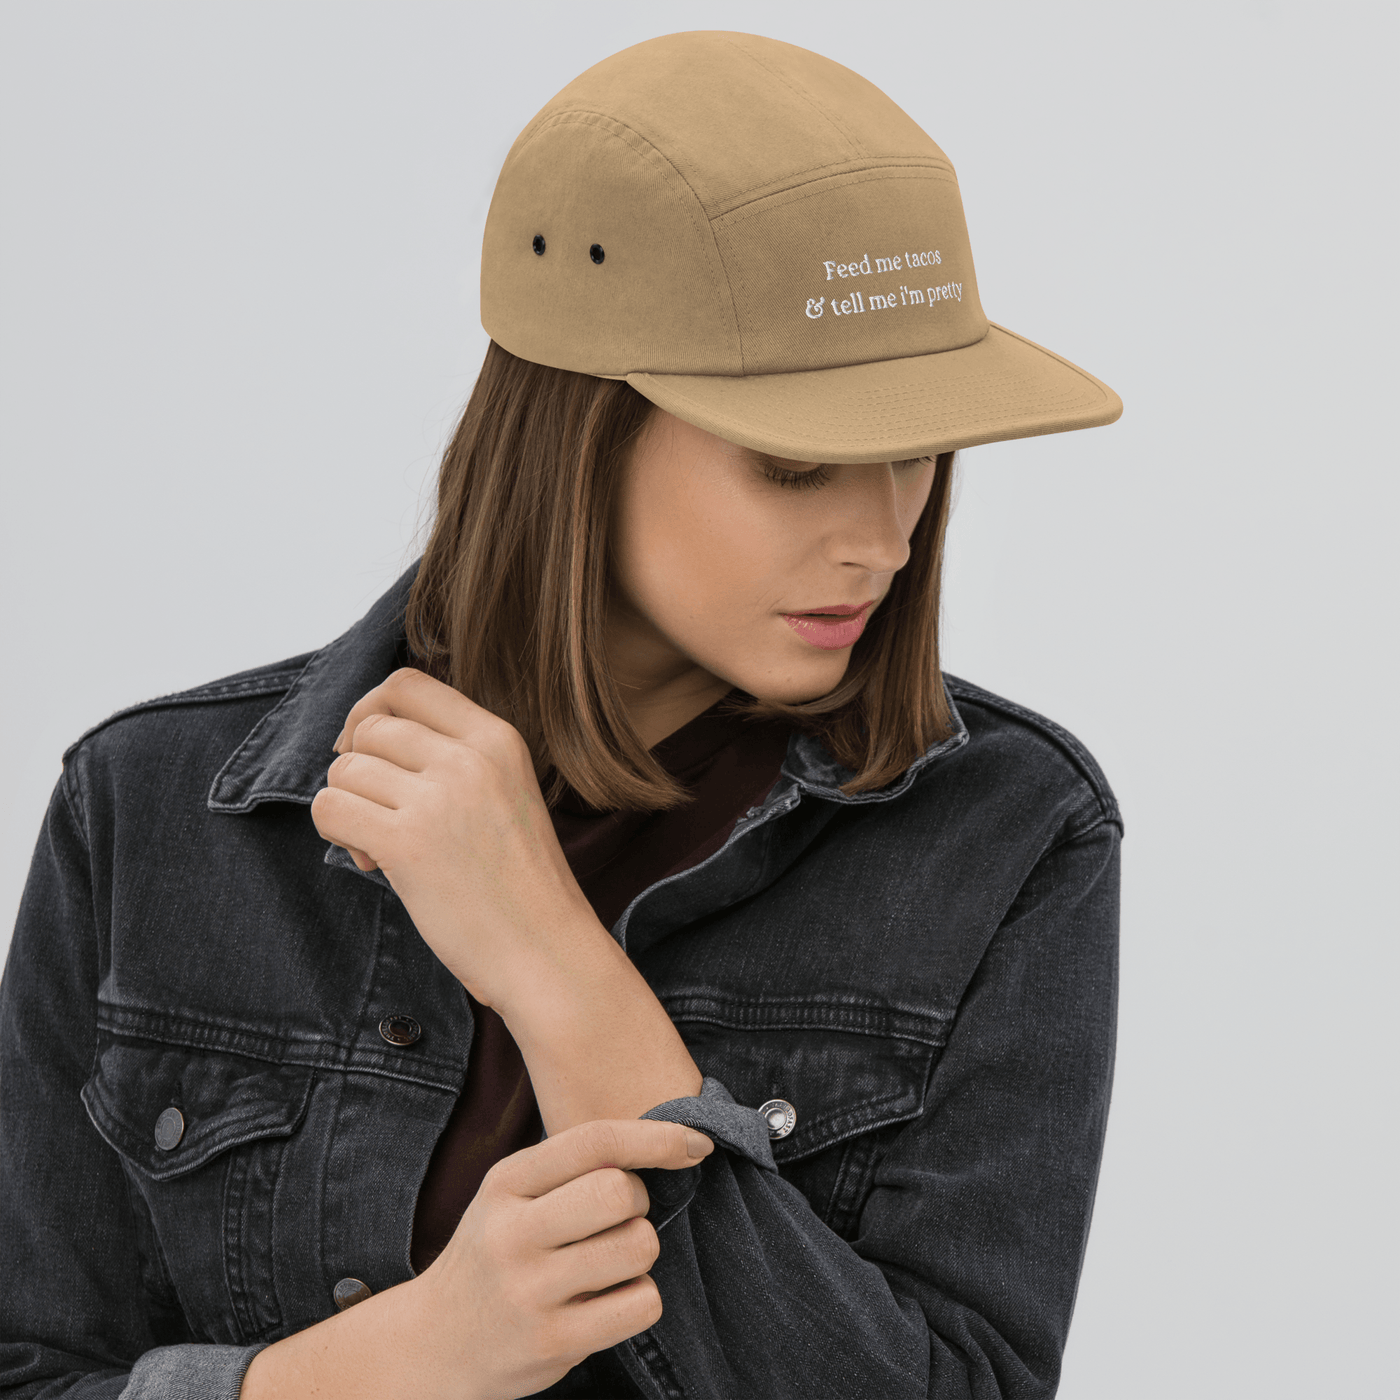 Feed me tacos Five Panel Cap - Khaki - - Just Another Cap Store